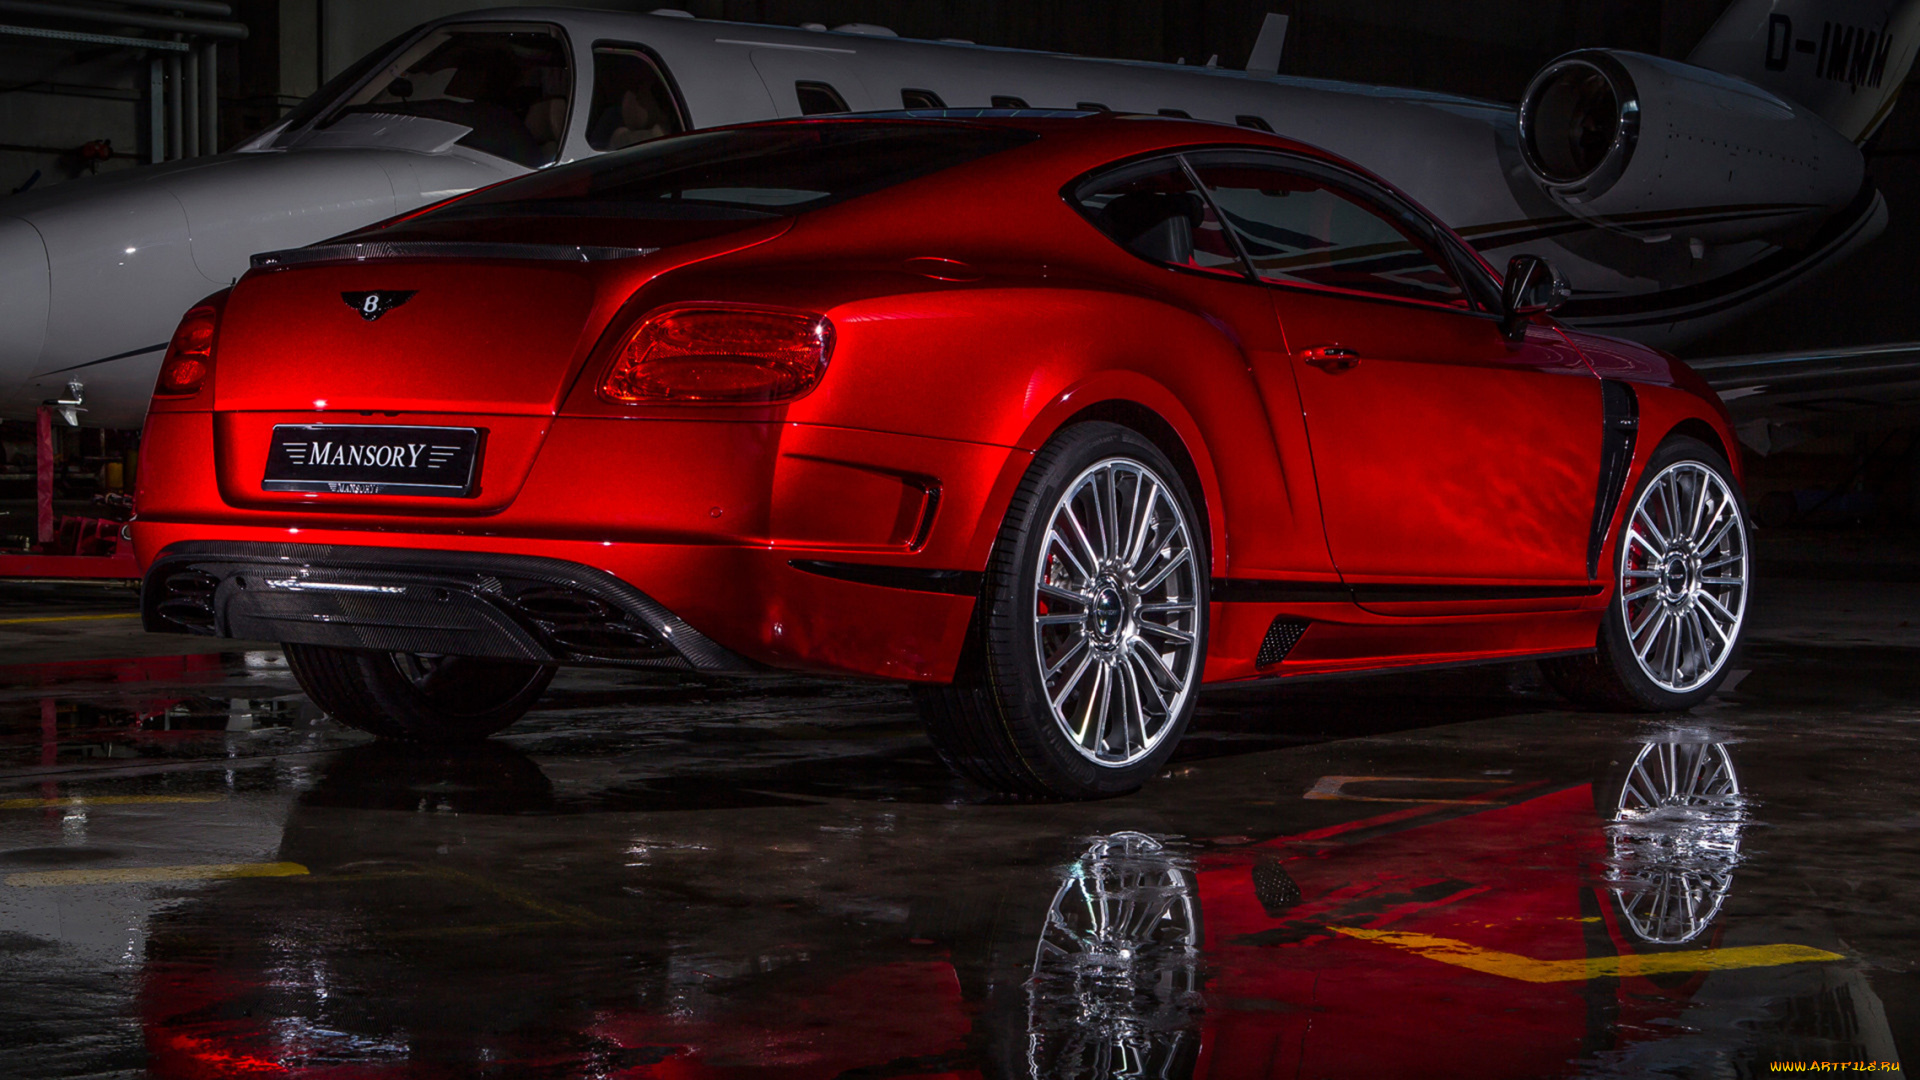 mansory, sanguis, based, on, bentley, continental, gt, 2013, автомобили, bentley, mansory, sanguis, based, continental, gt, 2013